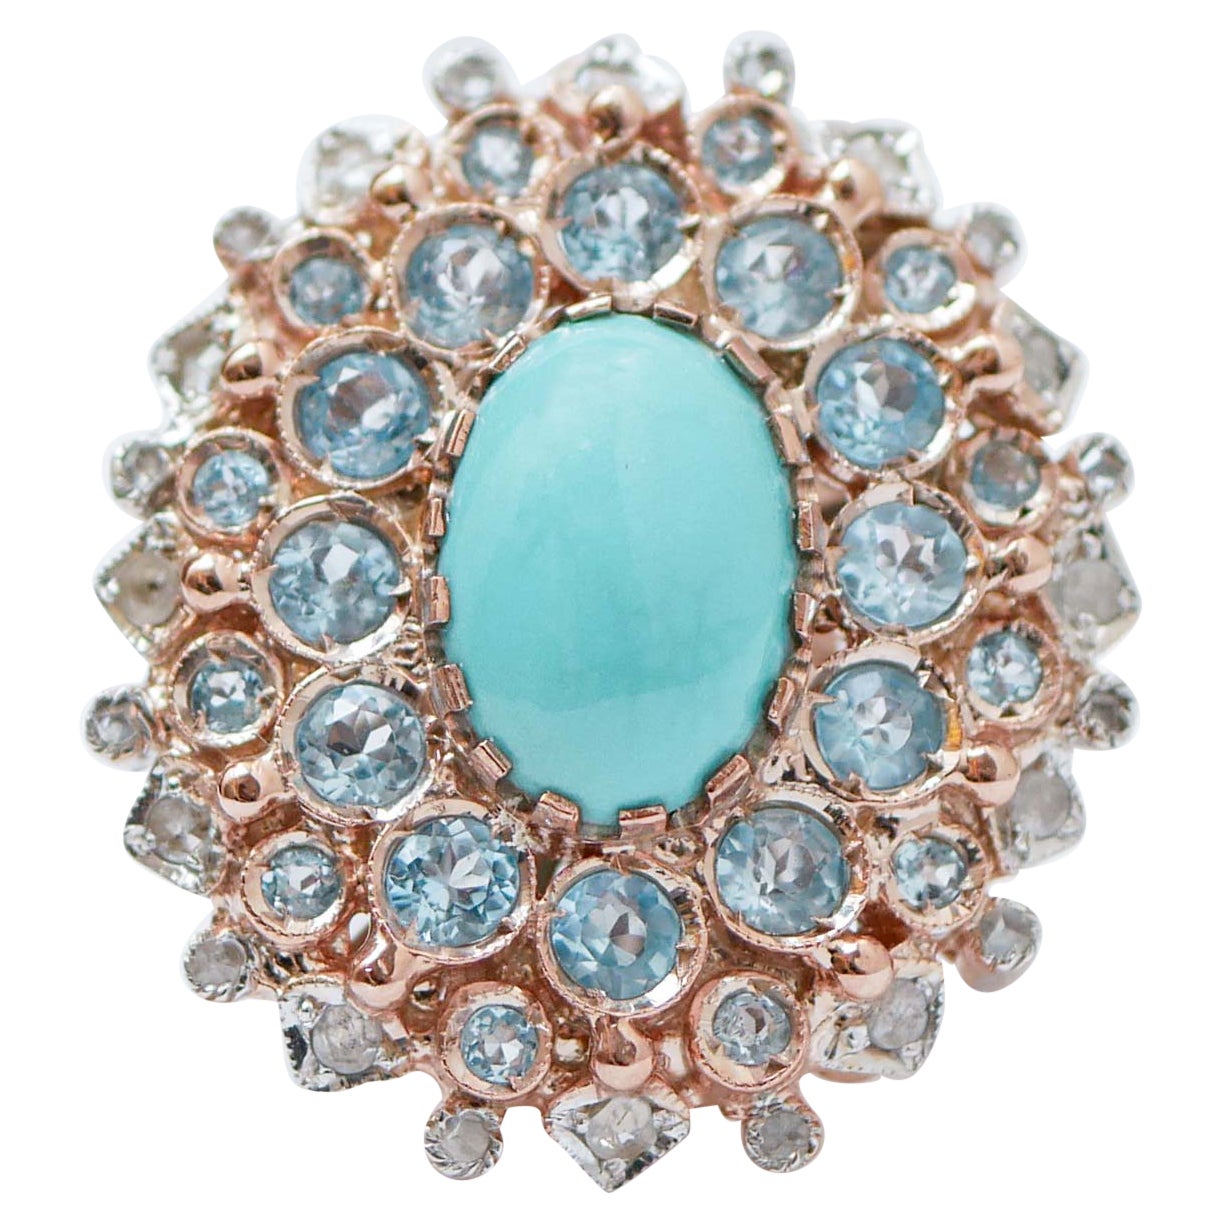 Turquoise, Topazs, Diamonds, Rose Gold and Silver Ring.